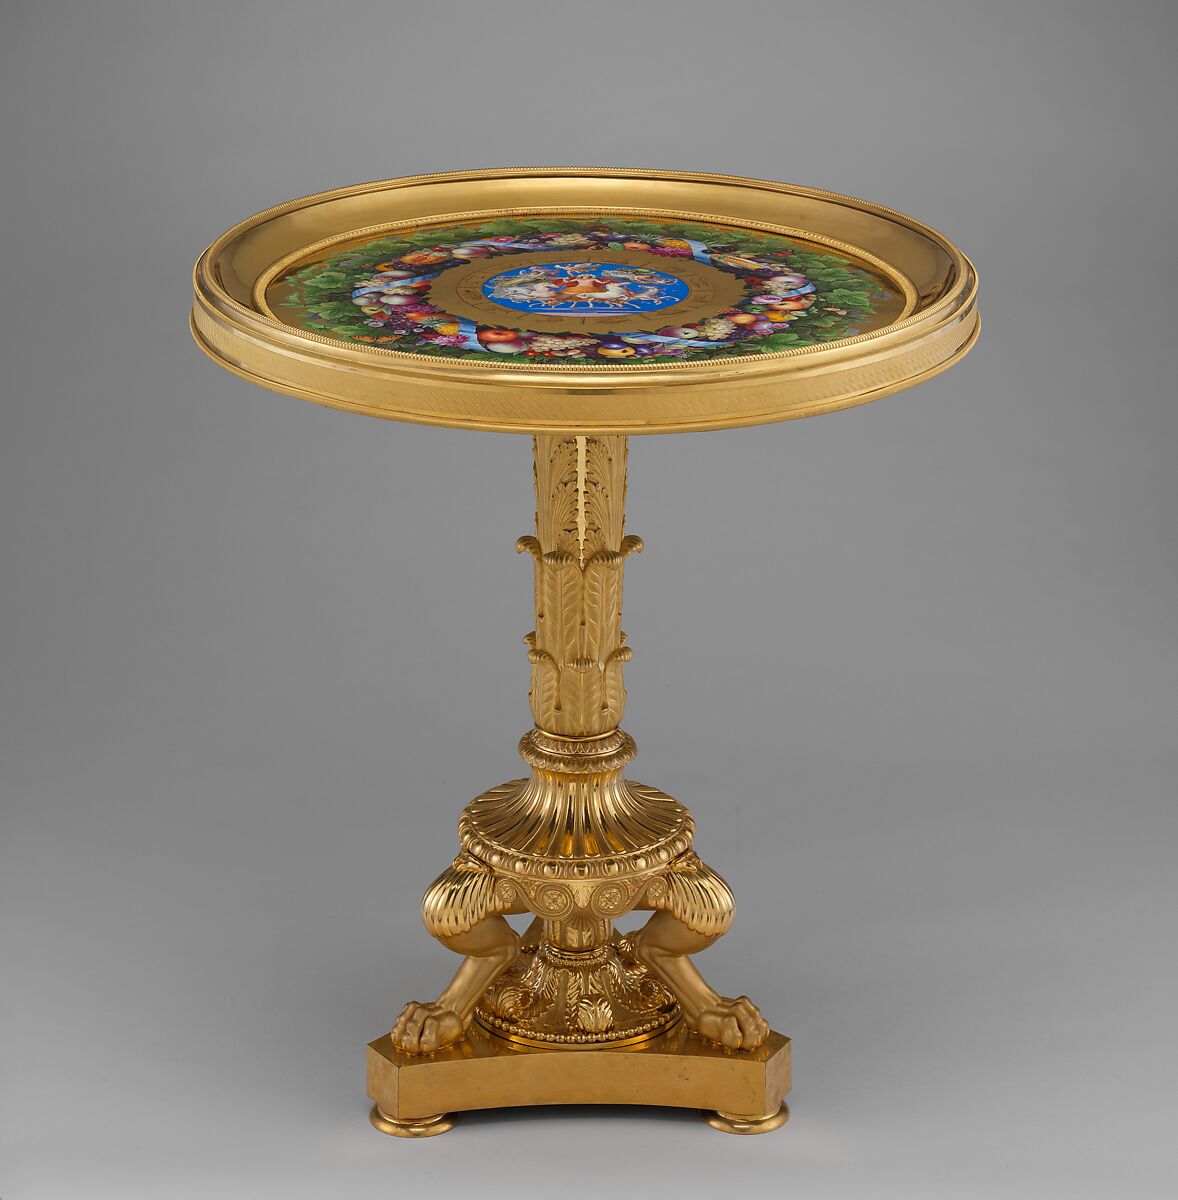 Table, Royal Porcelain Manufactory, Berlin (German, founded 1763), Hard-paste porcelain, gilded bronze, and yellow metal; iron and wood as support materials, German, Berlin 